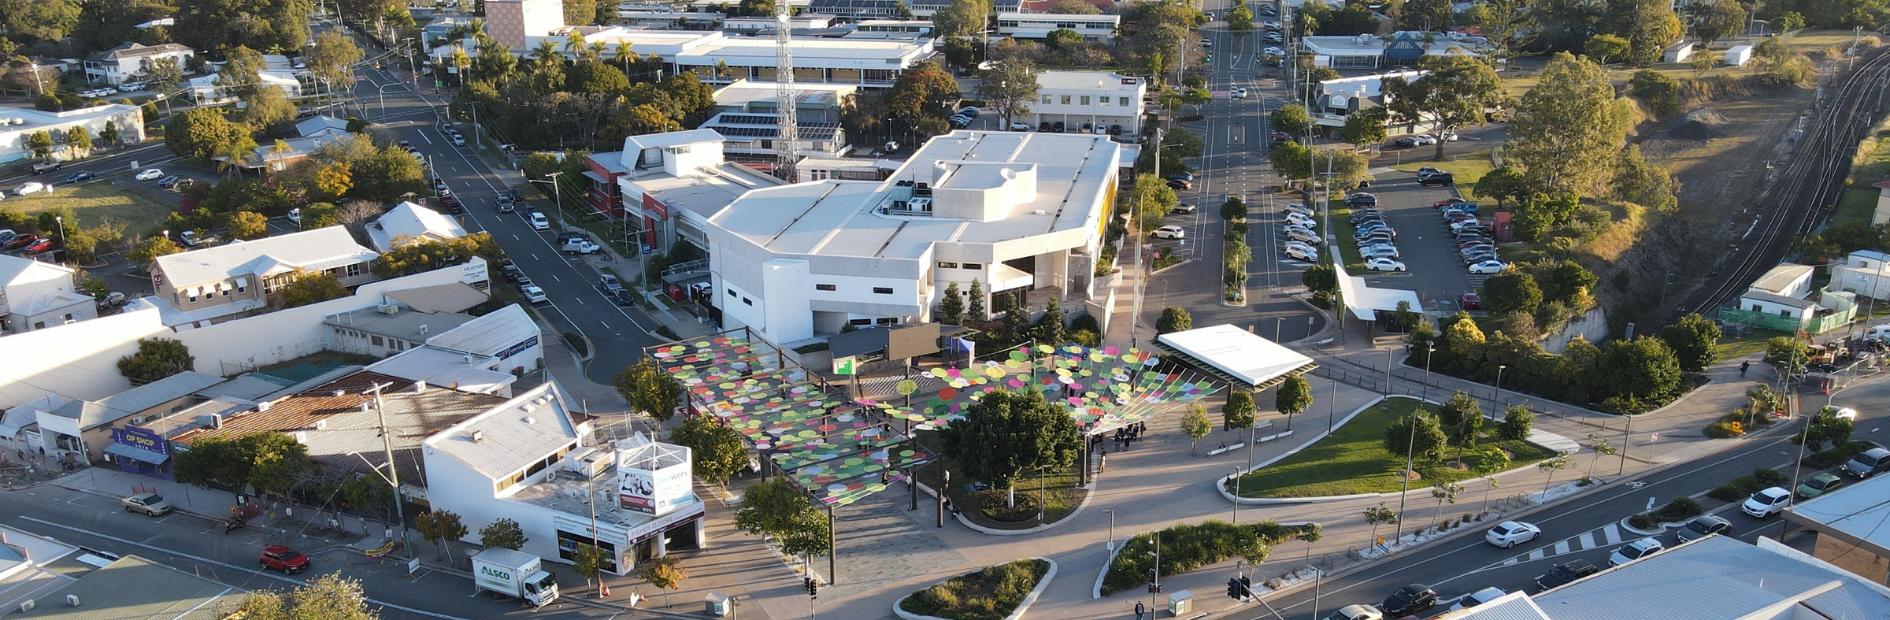 Aerial view of Beenleigh Town Square